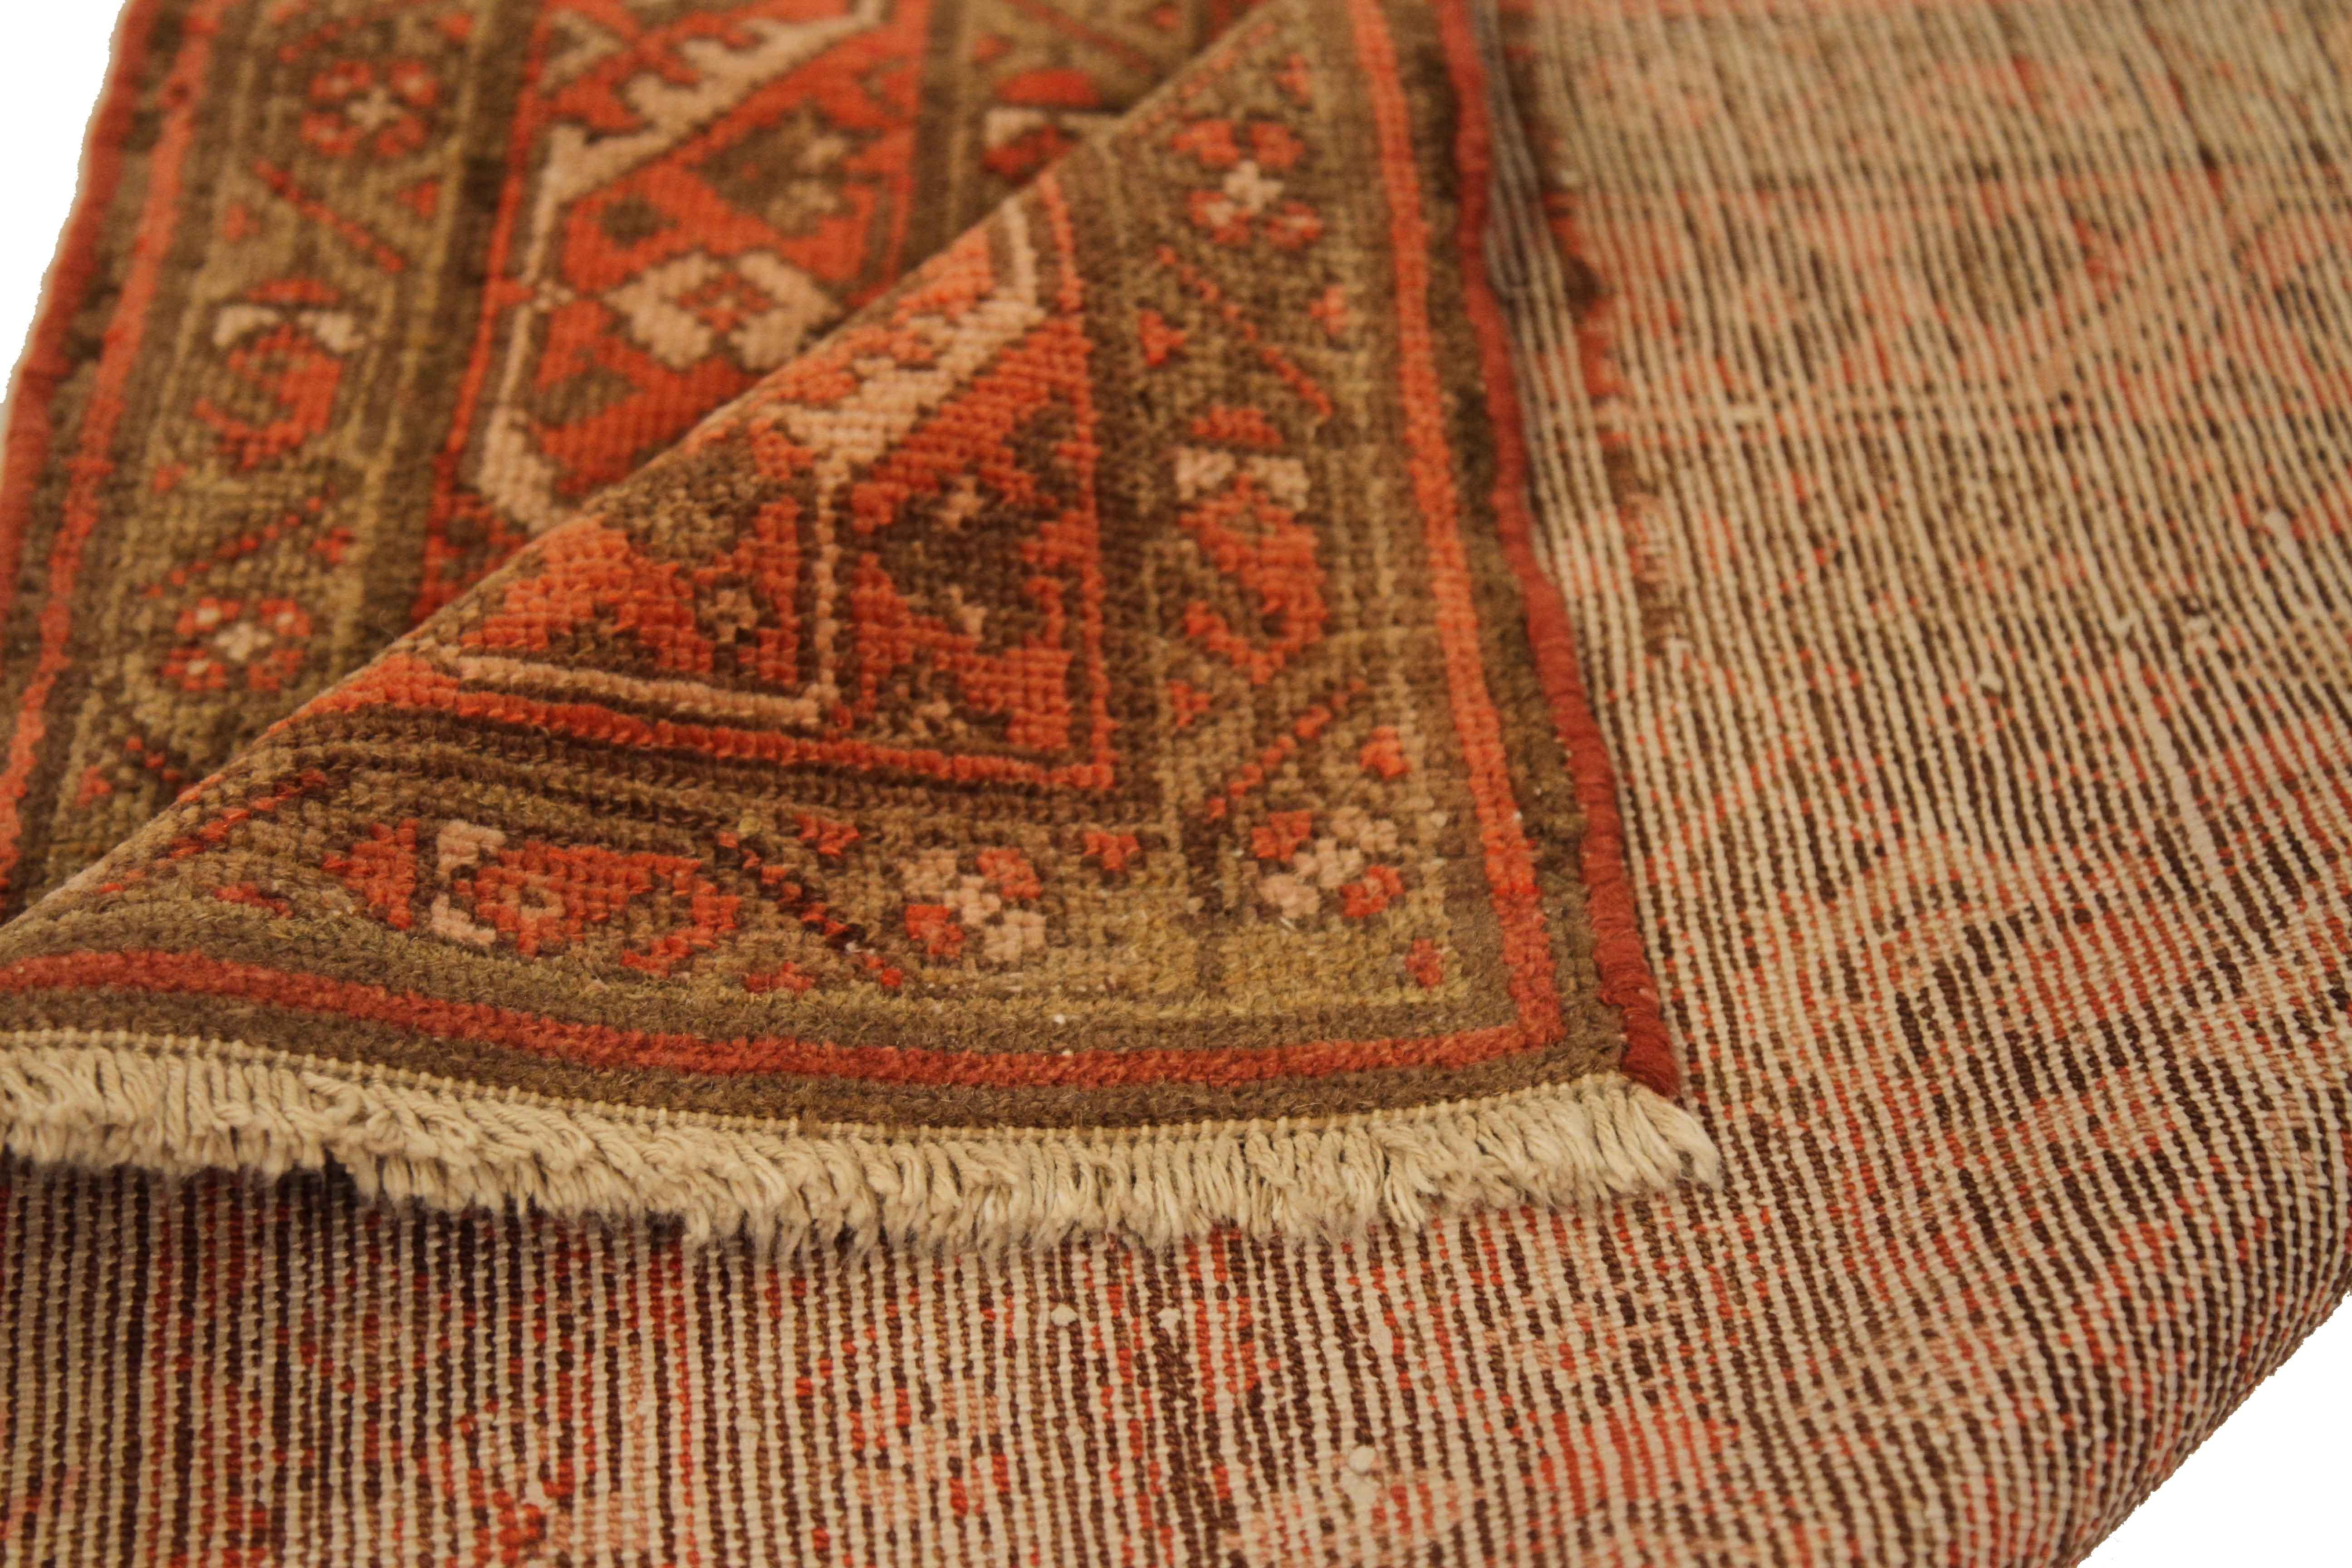 Hand-Knotted Antique Persian Rug in Malayer Design, 1910 For Sale